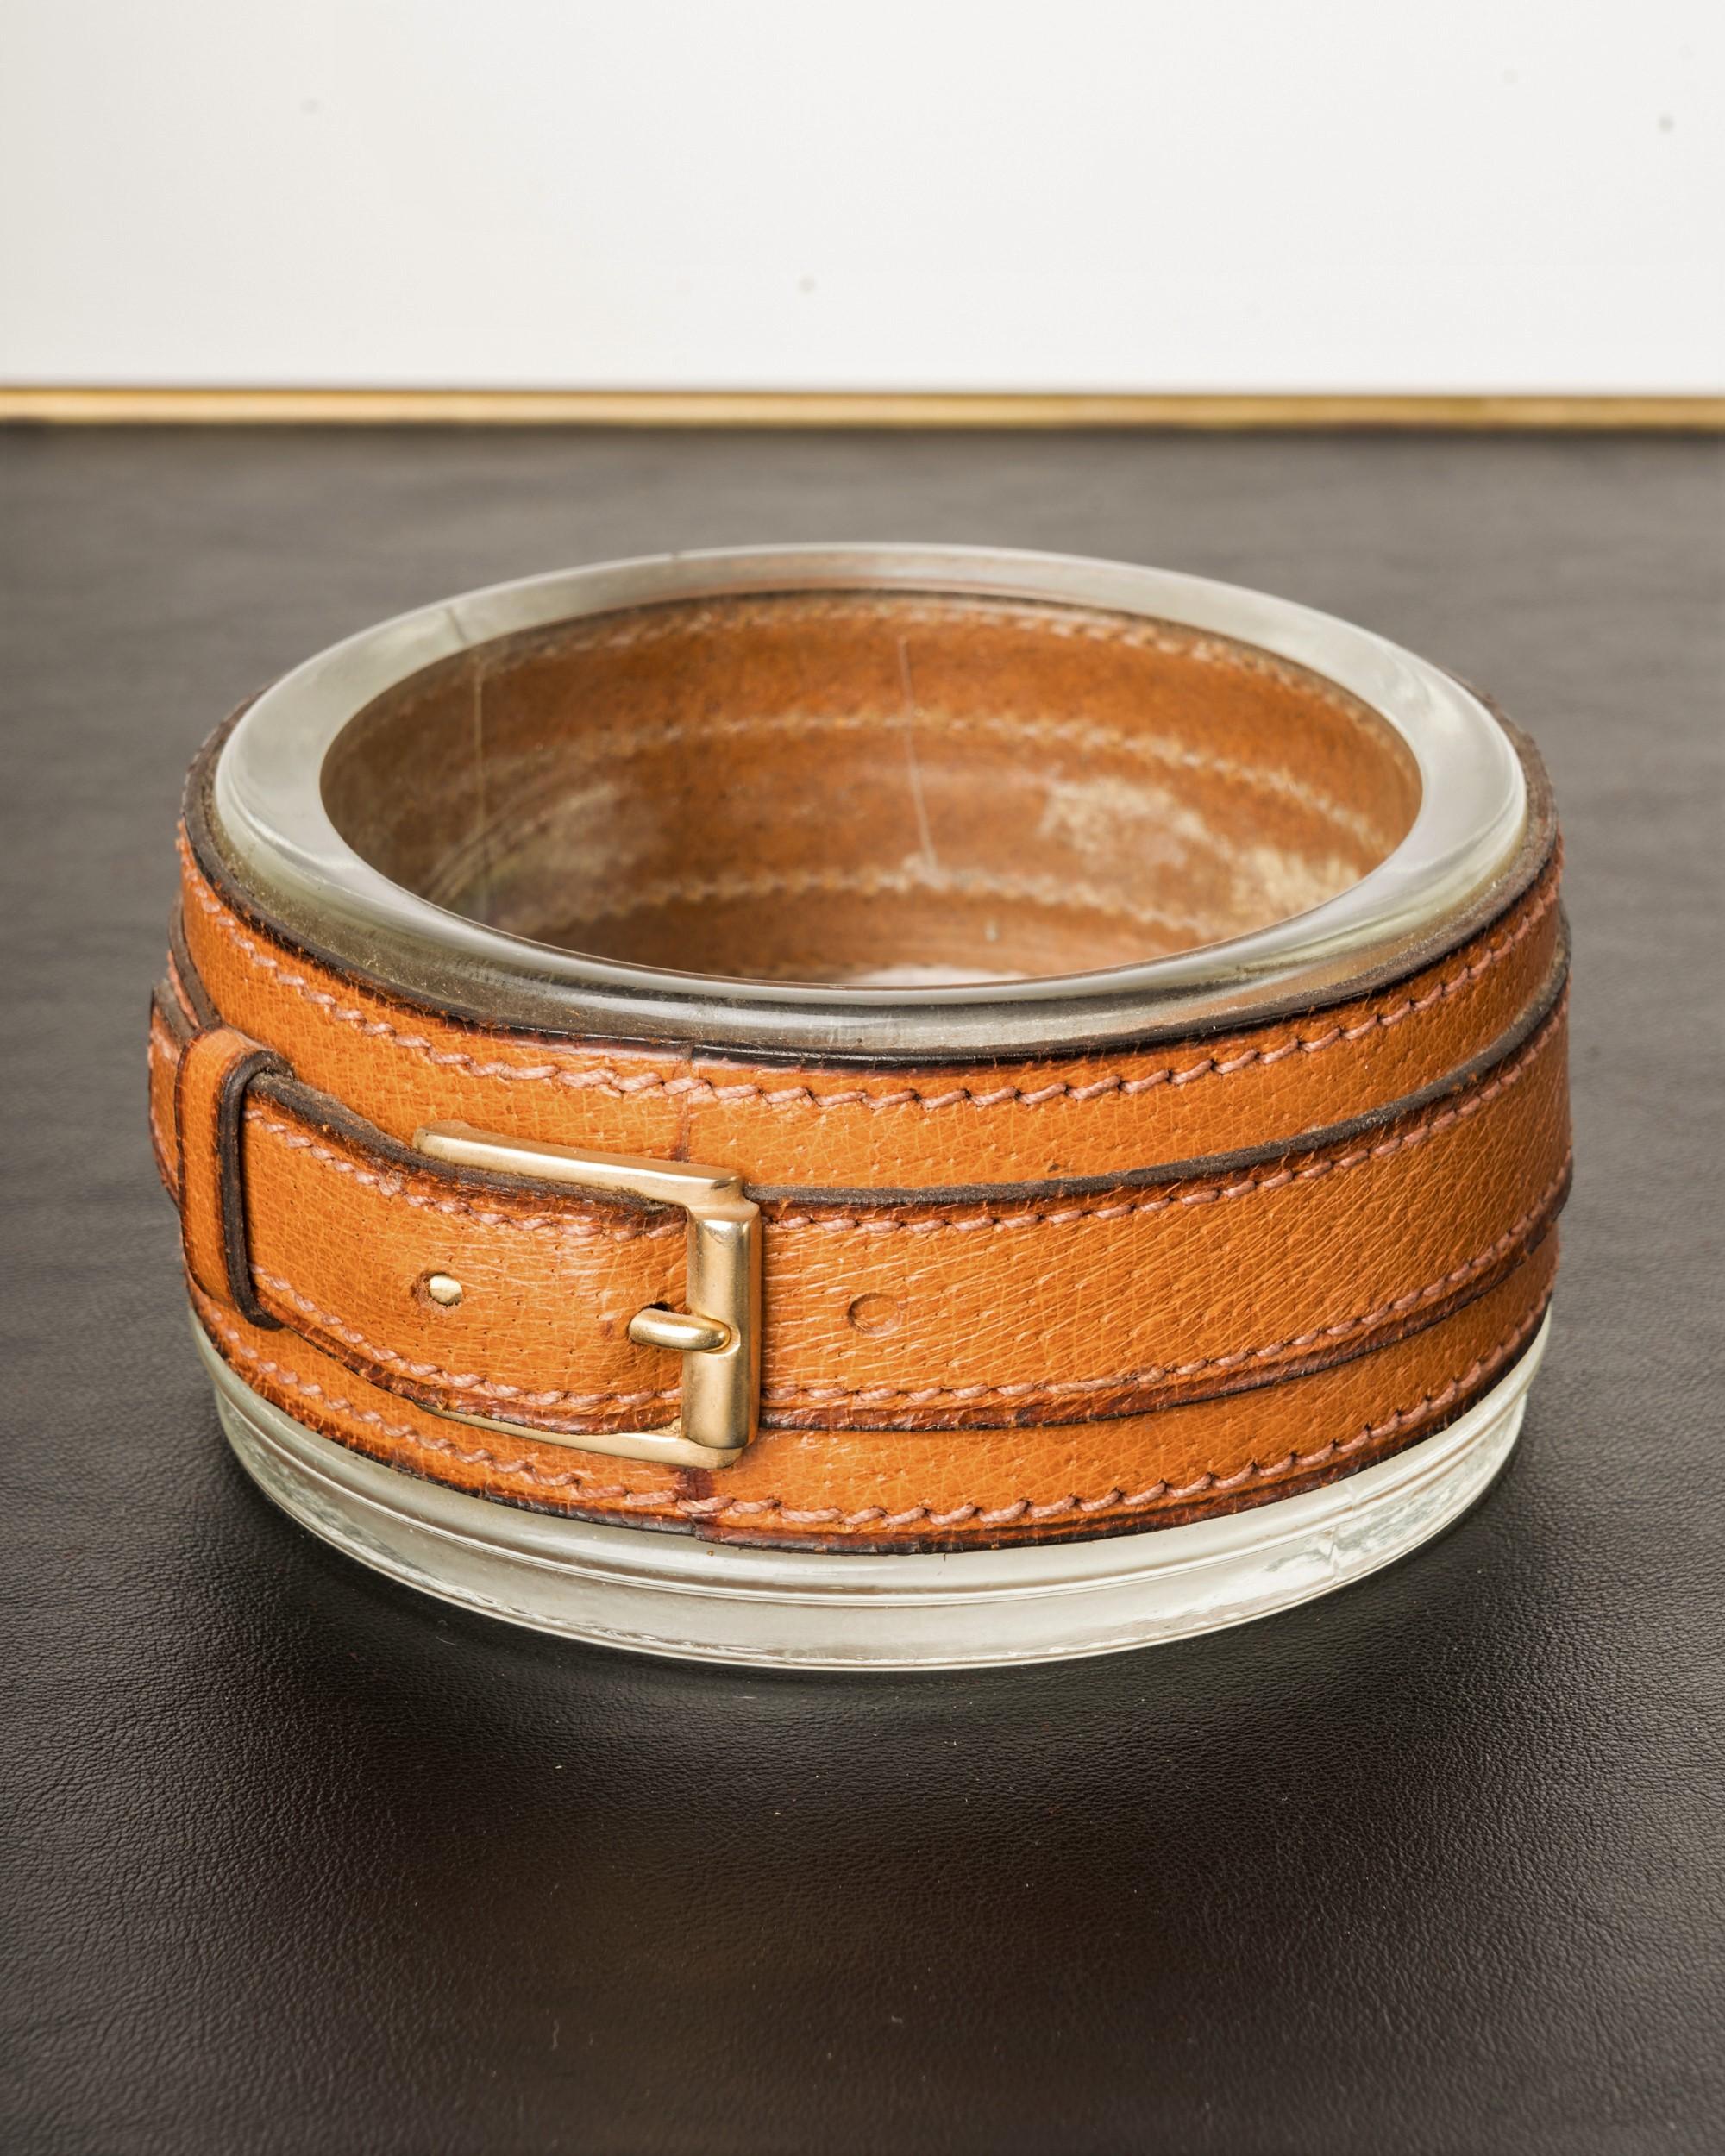 Handsome LUMAX thick glass vide-poche with a stitched Havana brown leather belt with a brass buckle. French 1960s, in very good vintage condition. The markings inside the dish are actually textures in the glass. Attributed to Jacques Adnet.